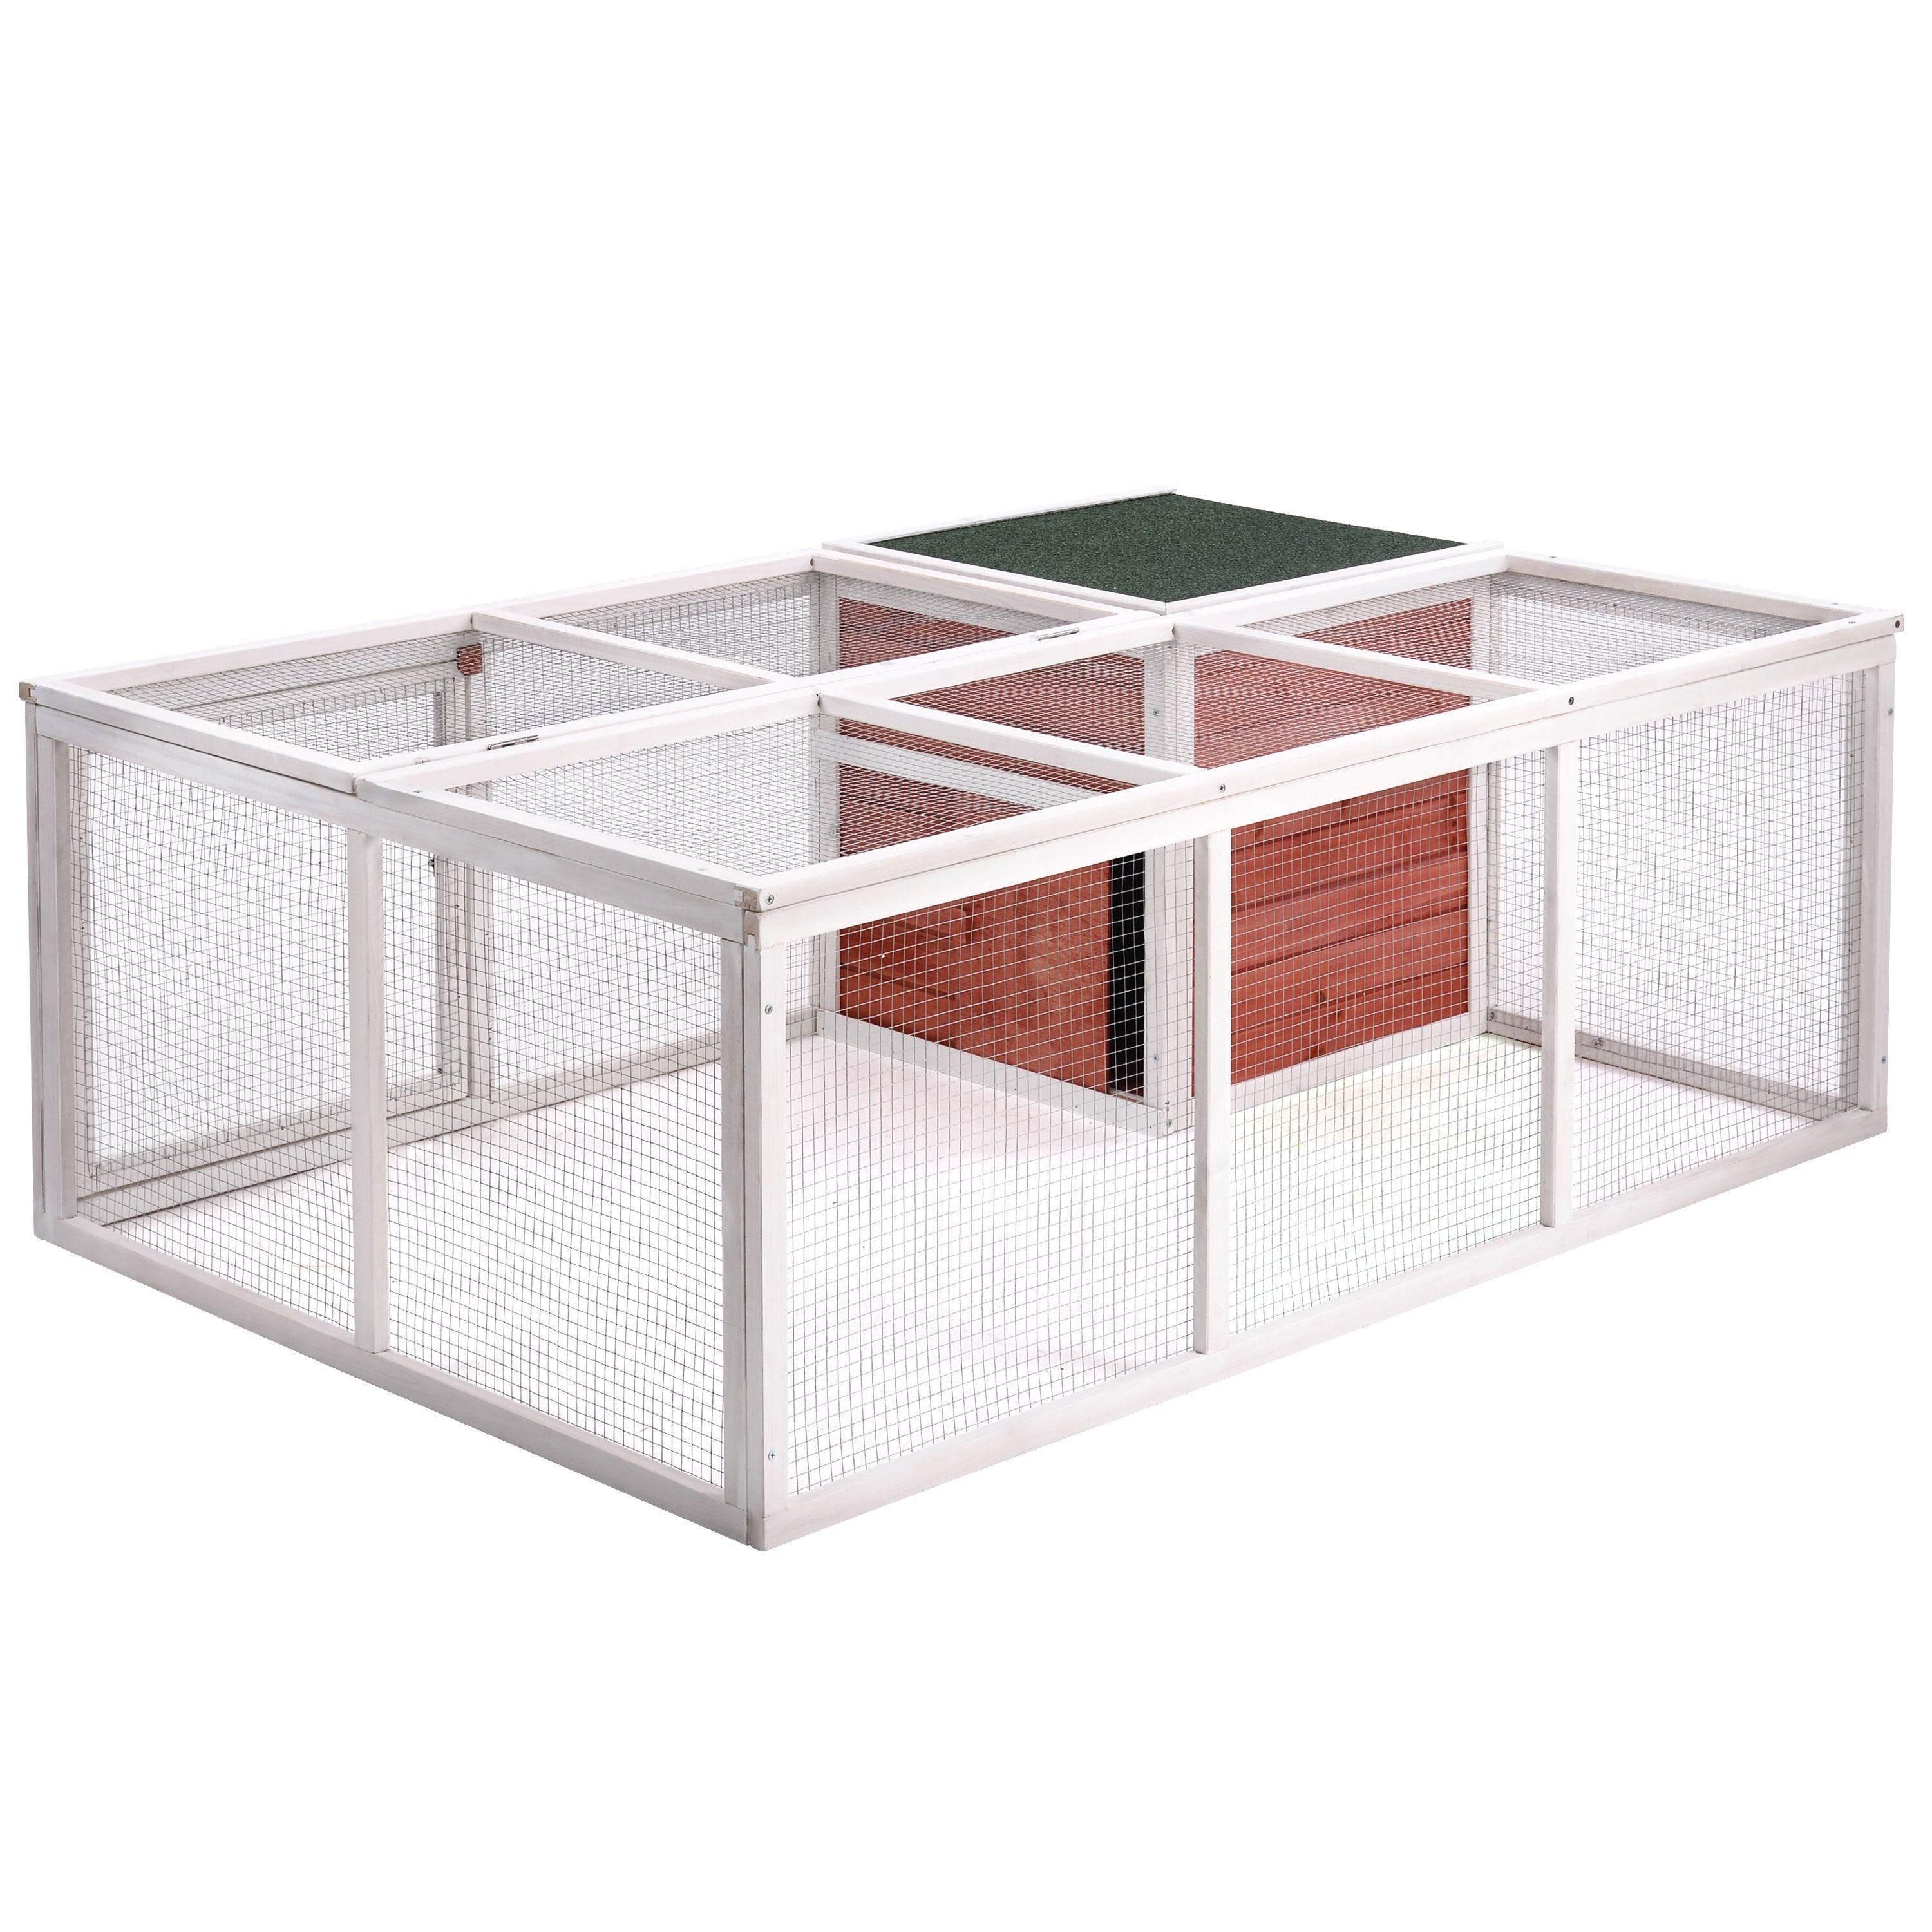 61.8 inches Rabbit Playpen Chicken Coop Pet House Small Animal Cage with Enclosed Run for Outdoor Garden Backyard-Boyel Living